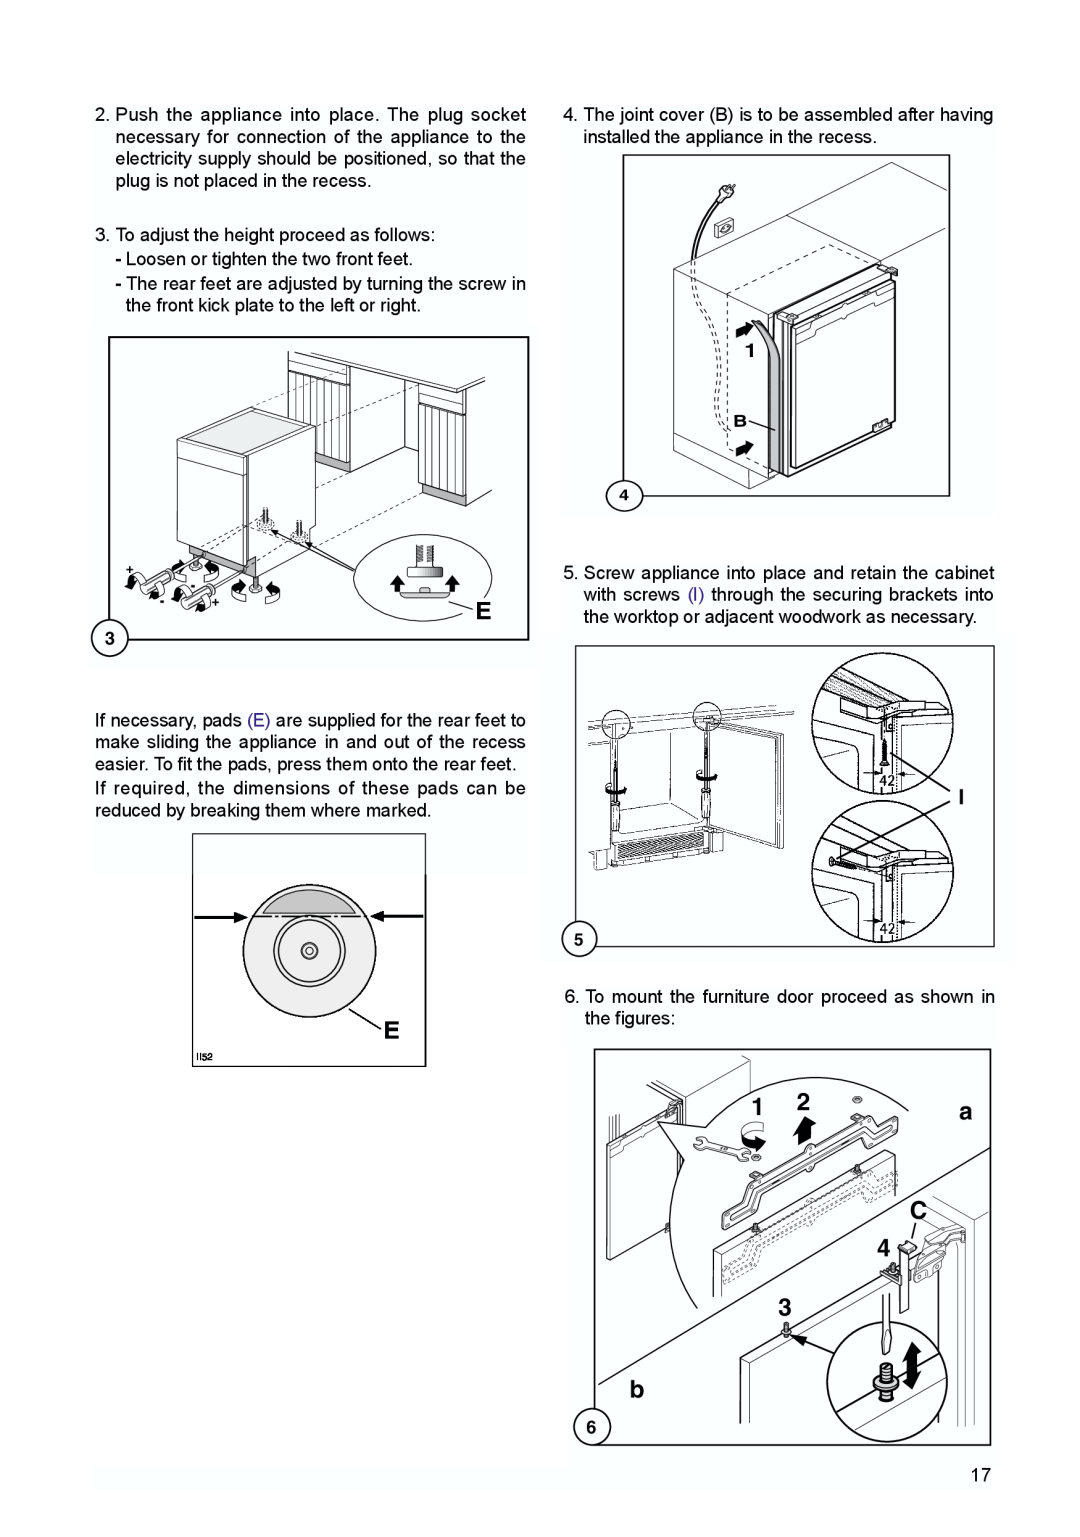 Tricity Bendix TBUR 120 installation instructions To mount the furniture door proceed as shown in, the figures 